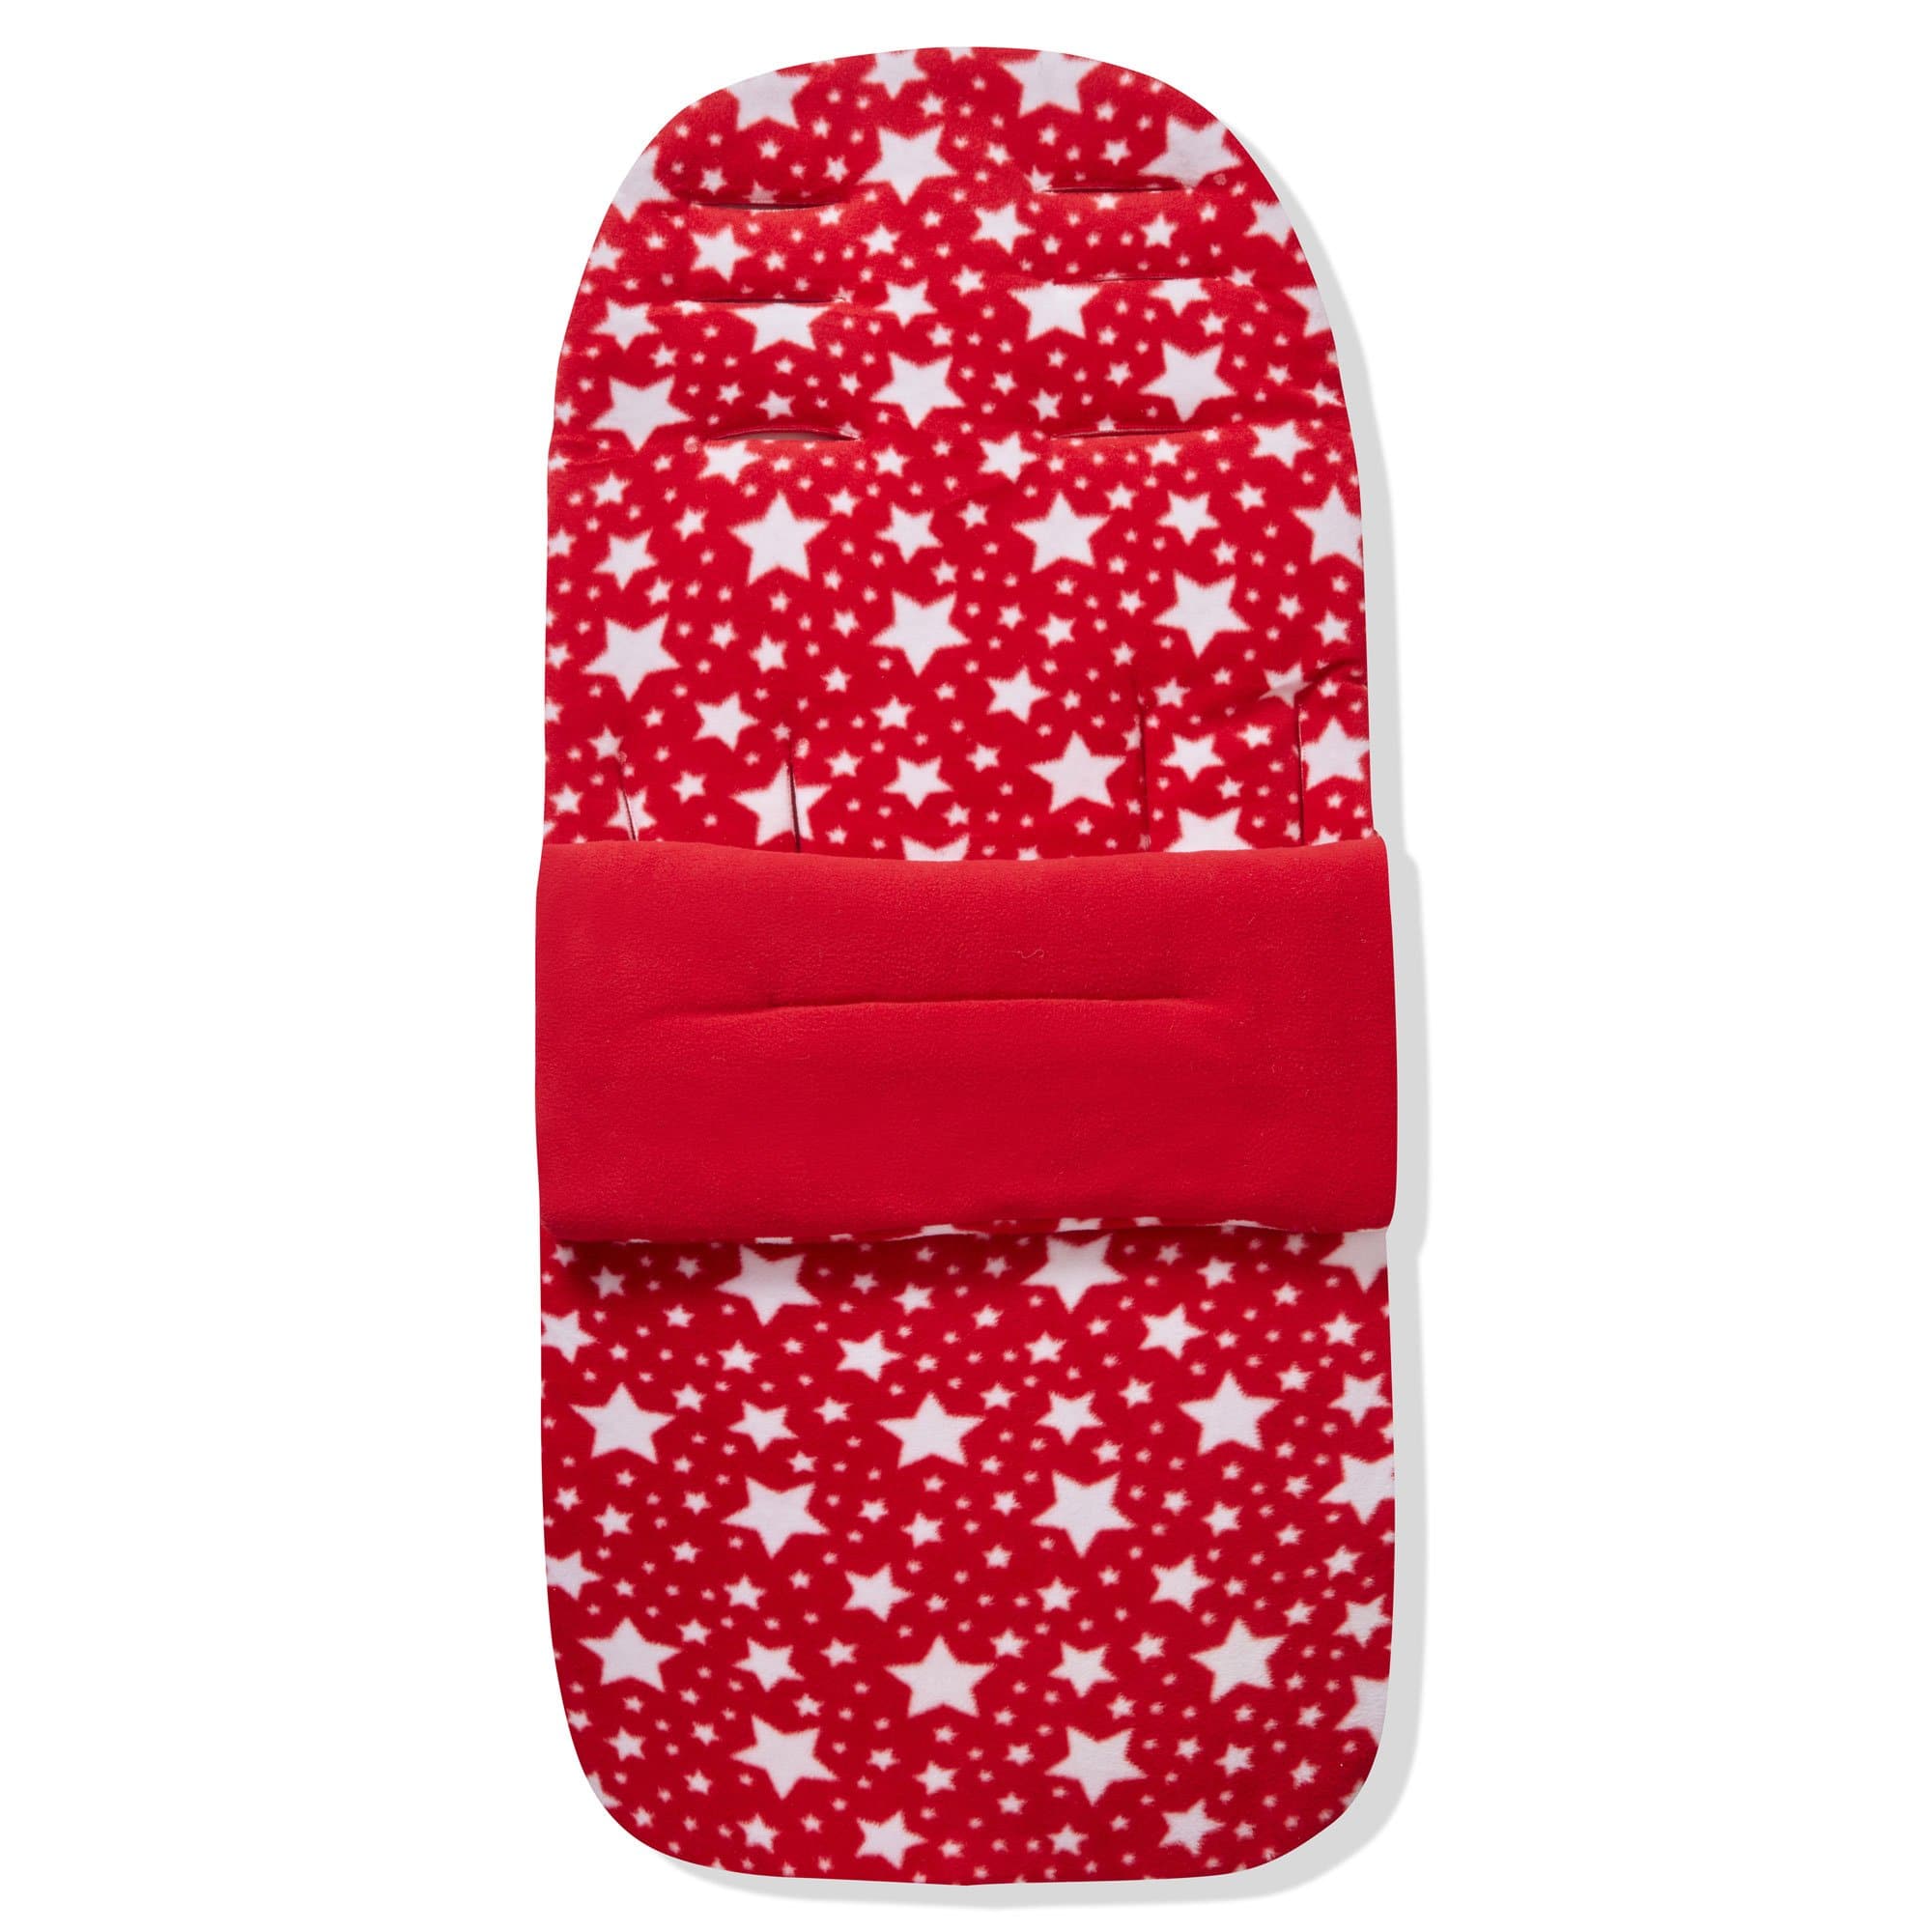 Fleece Footmuff / Cosy Toes Compatible With Concord - Red Star / Fits All Models | For Your Little One